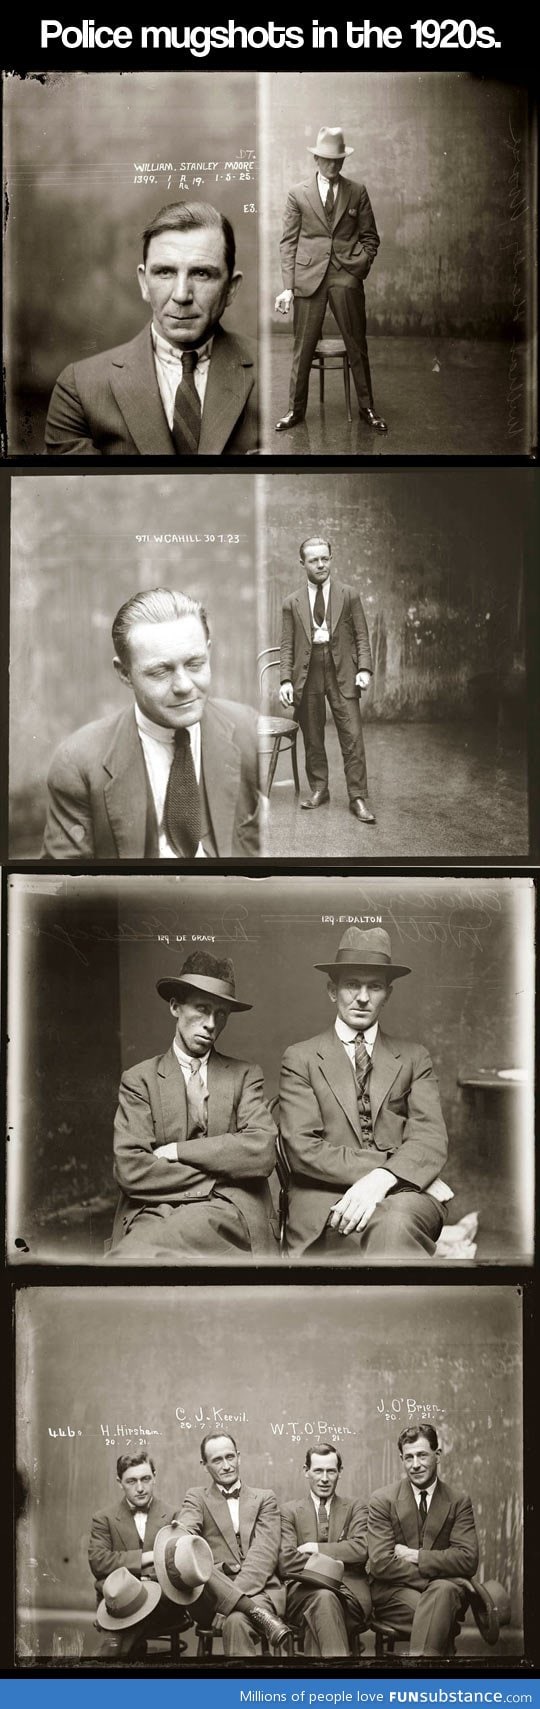 Police mugshots in the 1920s